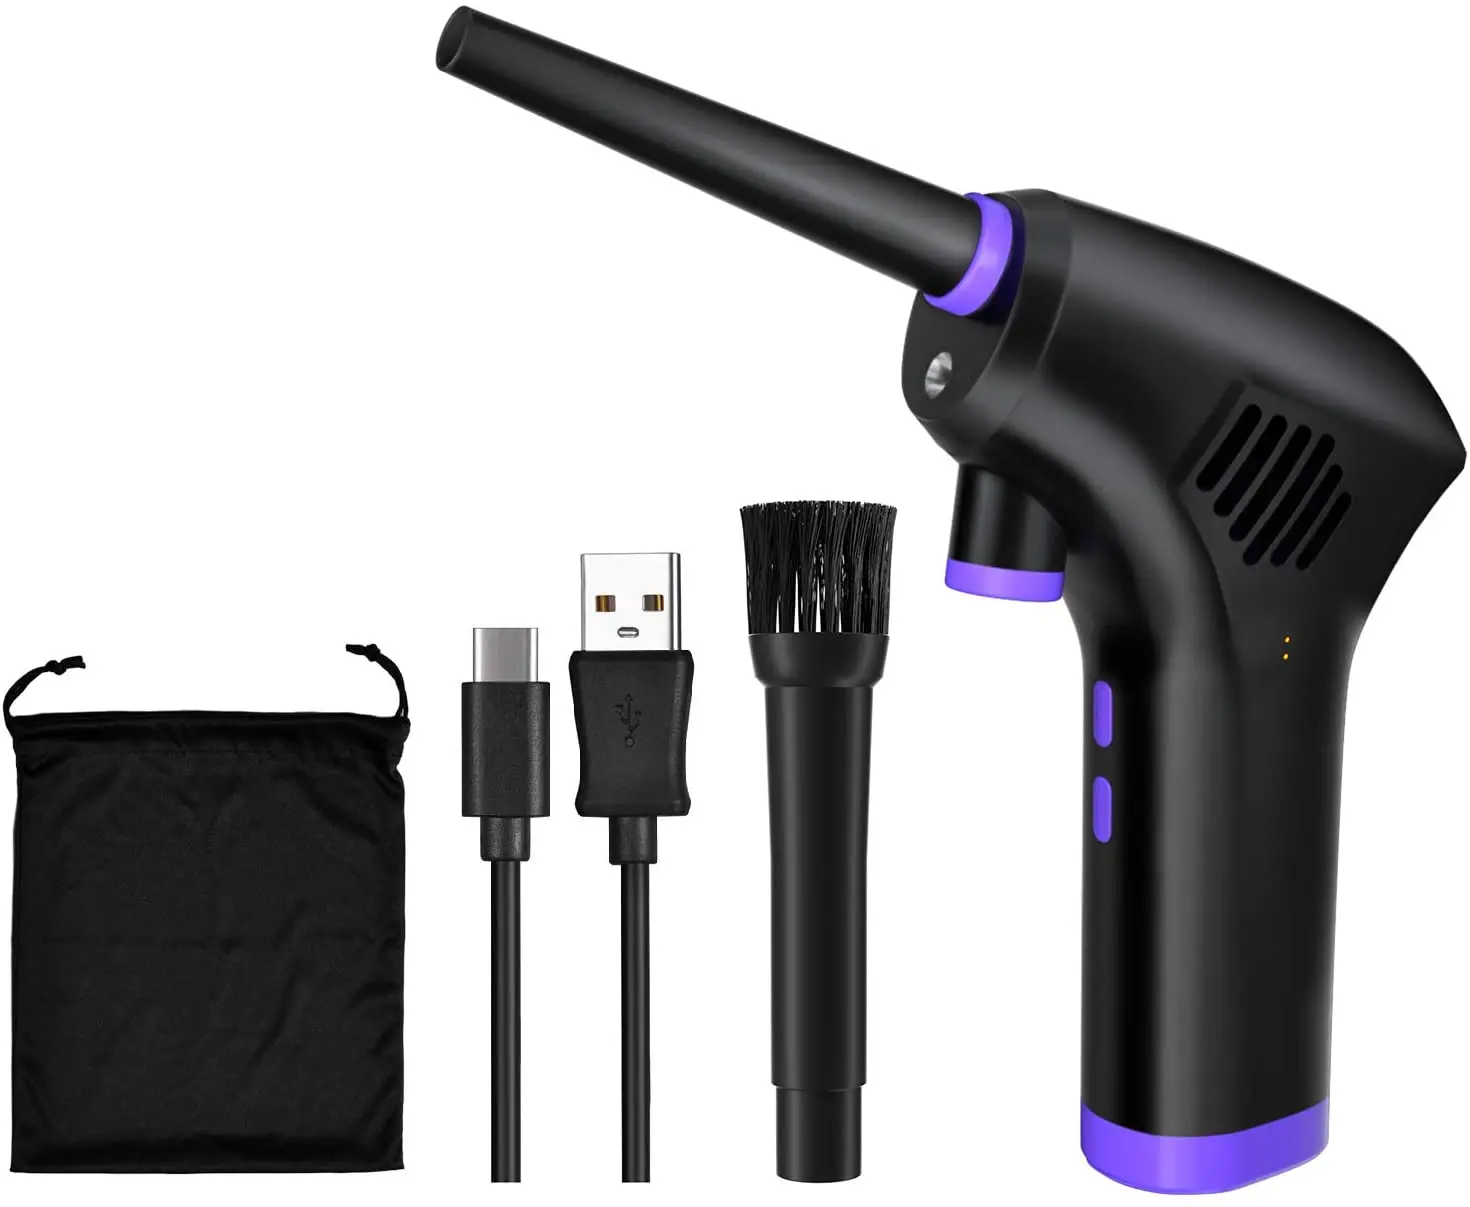 NEW ER ALPTHY Air Duster, Electric Cordless Air Duster Keyboard Cleaner with 15000mAH Rechargeable Battery, Alternative to